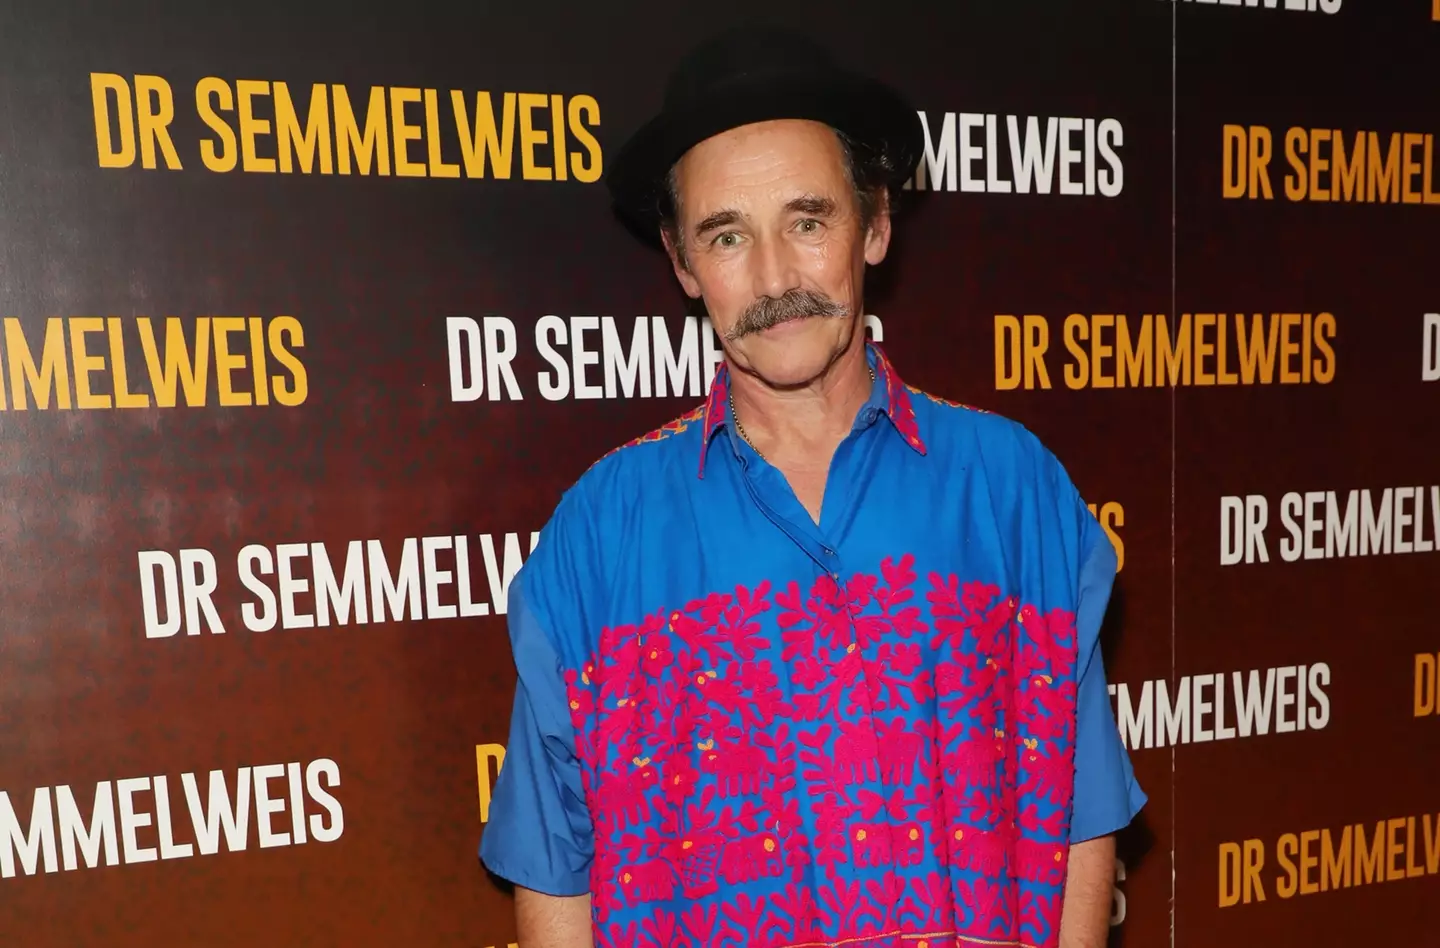 Mark Rylance said he was personally 'attacked' after making the film.